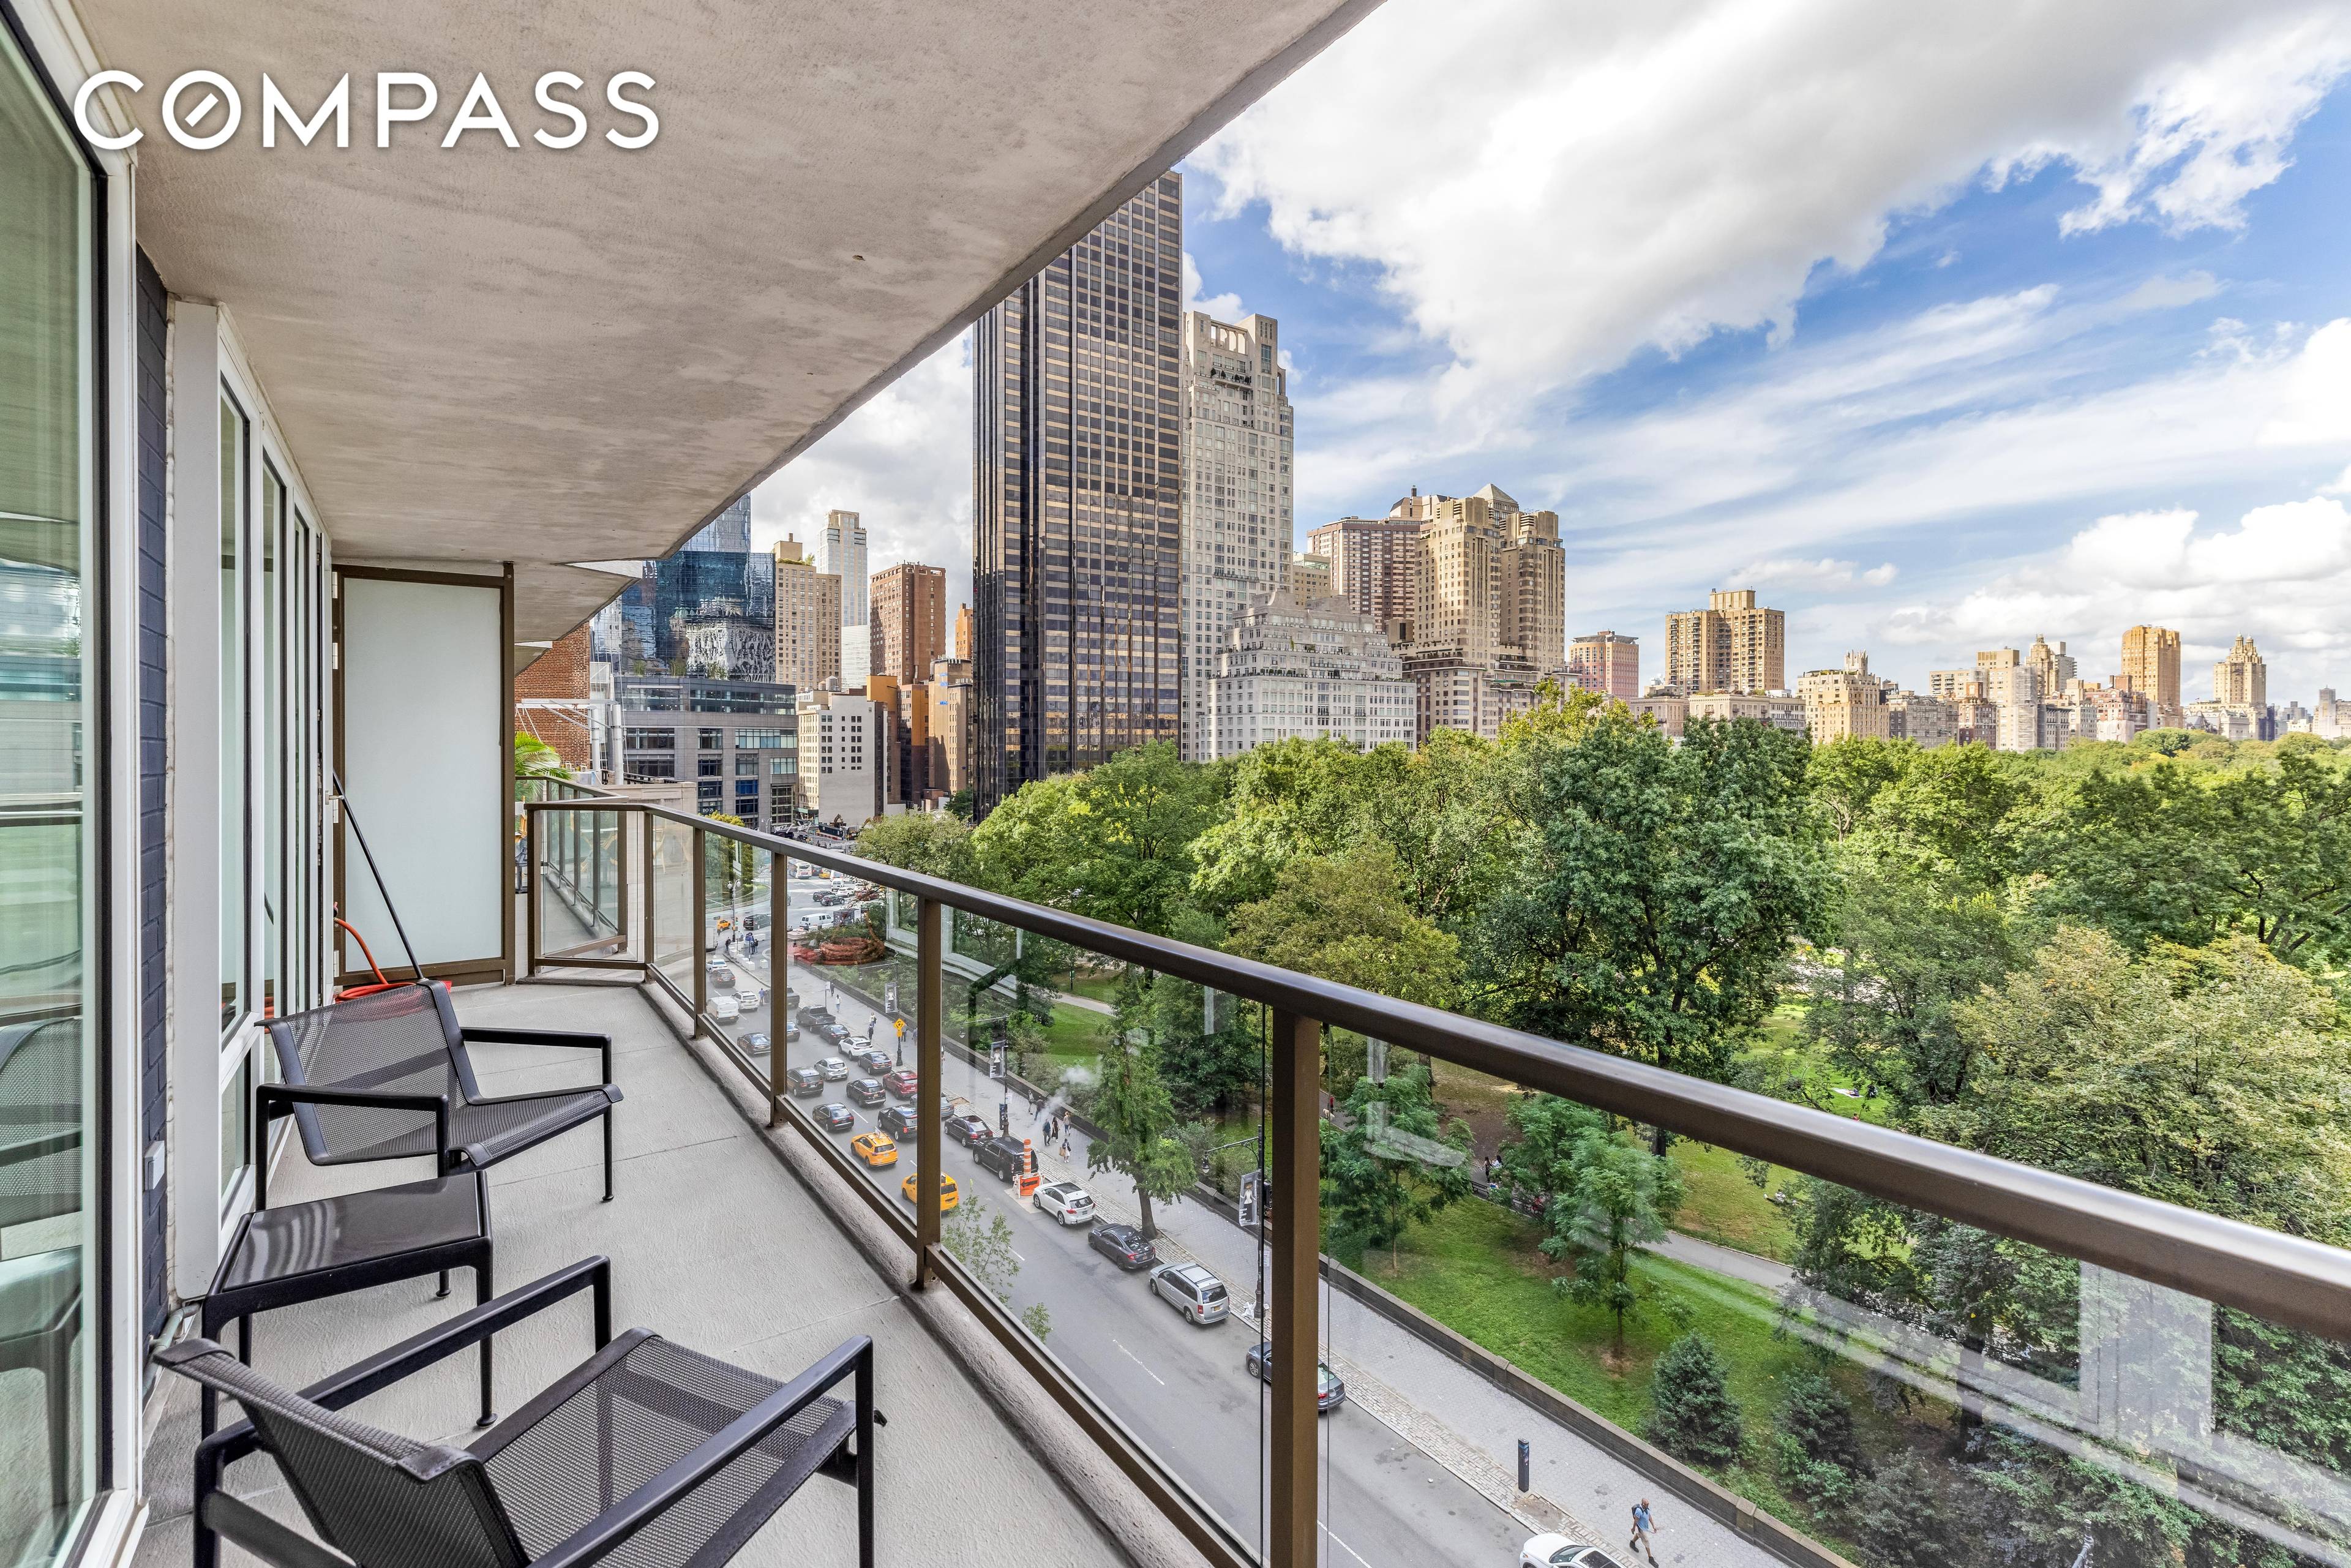 Central Park becomes your daily backdrop and personal playground in this breathtaking two bedroom, two and a half bathroom Central Park South residence beautifully reimagined by Stuart Parr Design.